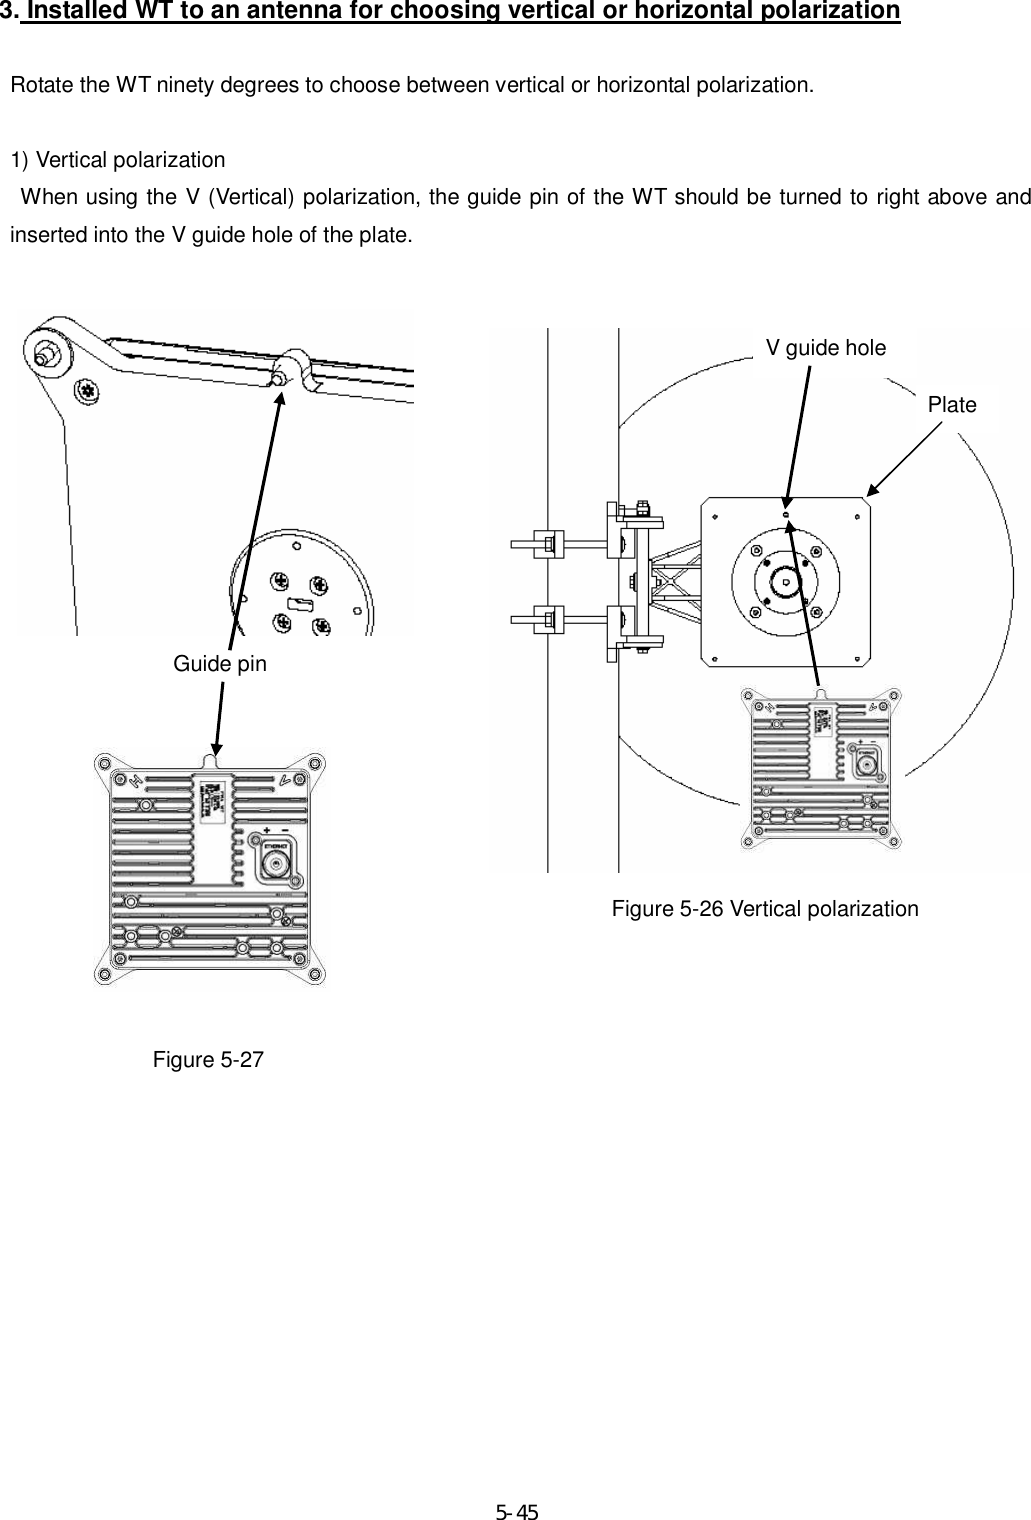     5-45 3. Installed WT to an antenna for choosing vertical or horizontal polarization  Rotate the WT ninety degrees to choose between vertical or horizontal polarization.  1) Vertical polarization     When using the V (Vertical) polarization, the guide pin of the WT should be turned to right above and inserted into the V guide hole of the plate.                                Figure 5-26 Vertical polarization           Figure 5-27           V guide hole Plate Guide pin 